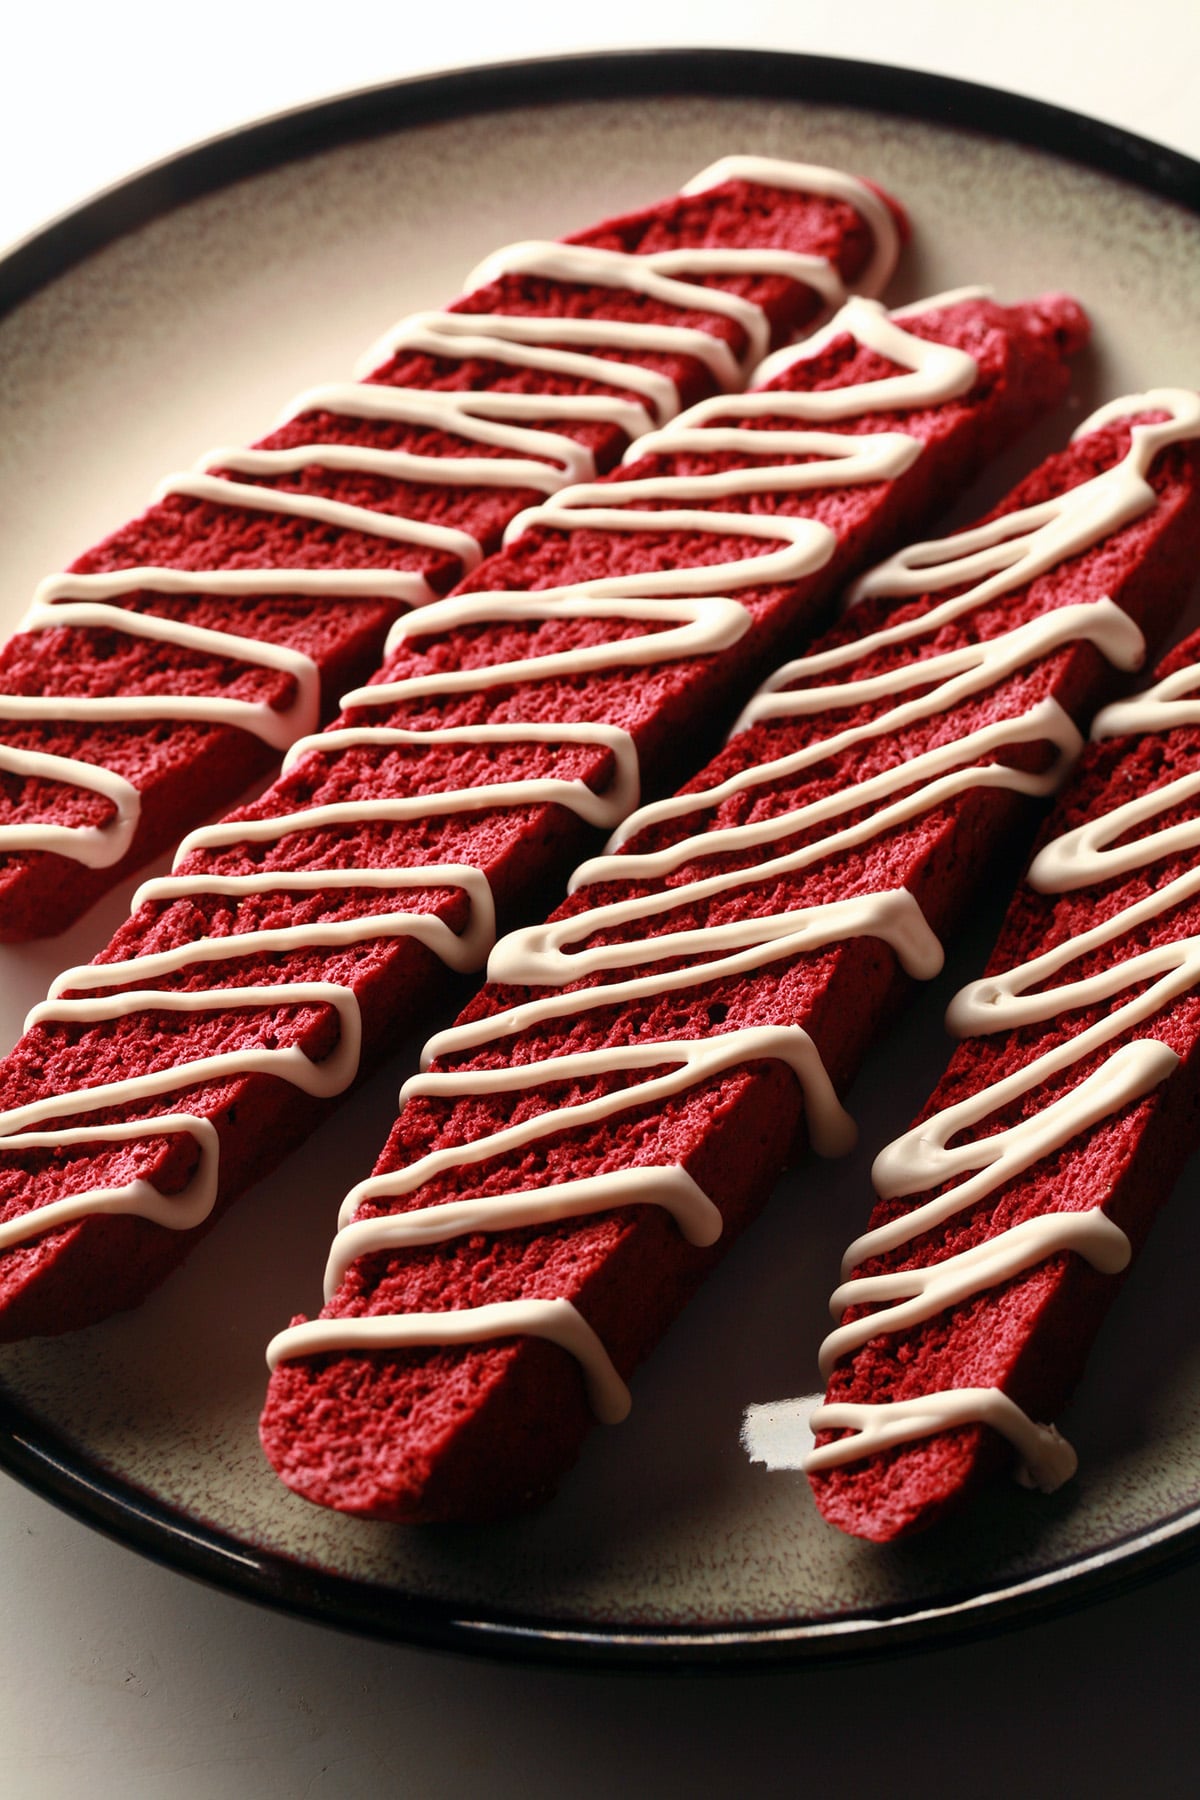 4 red velvet biscotti on a plate. They are each drizzled with a white glaze.